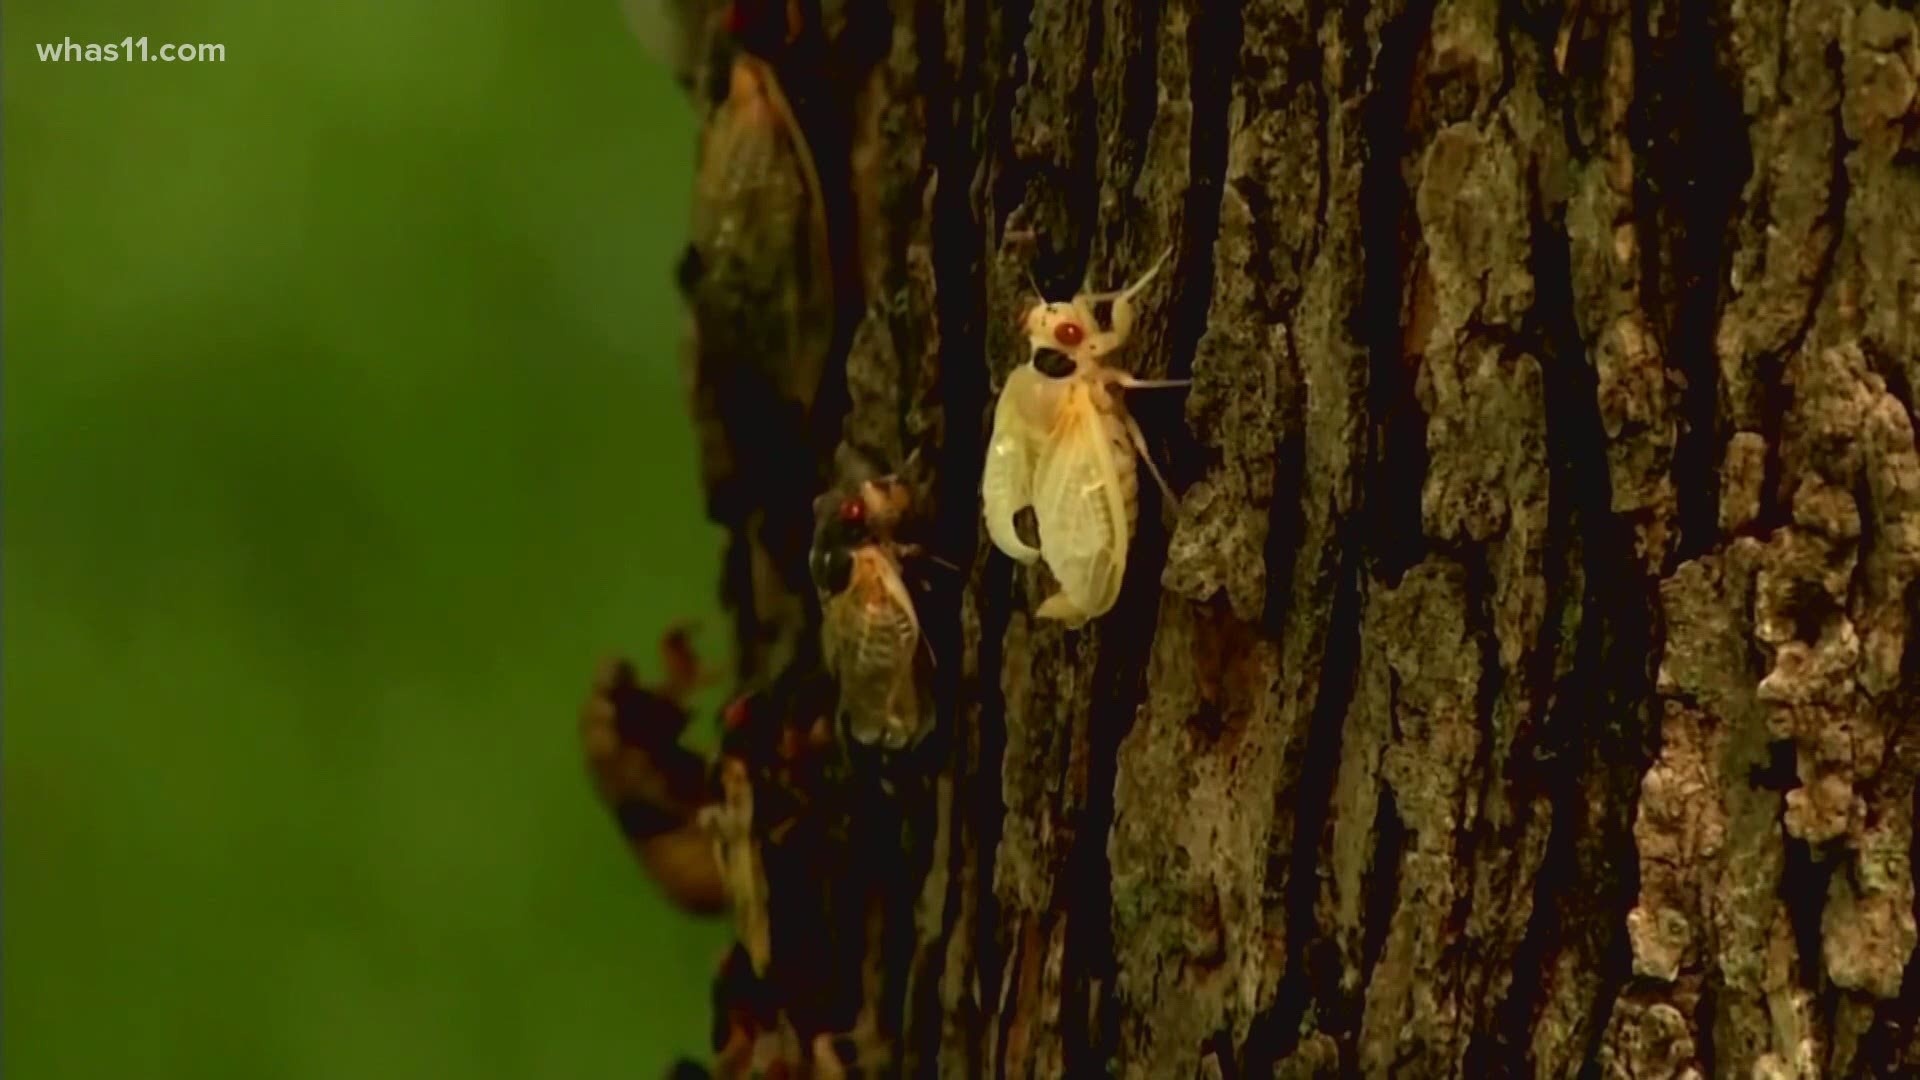 While some places are swarming with cicadas, others haven't seen a single shell. Why are cicadas so prevalent in some places but not in others?